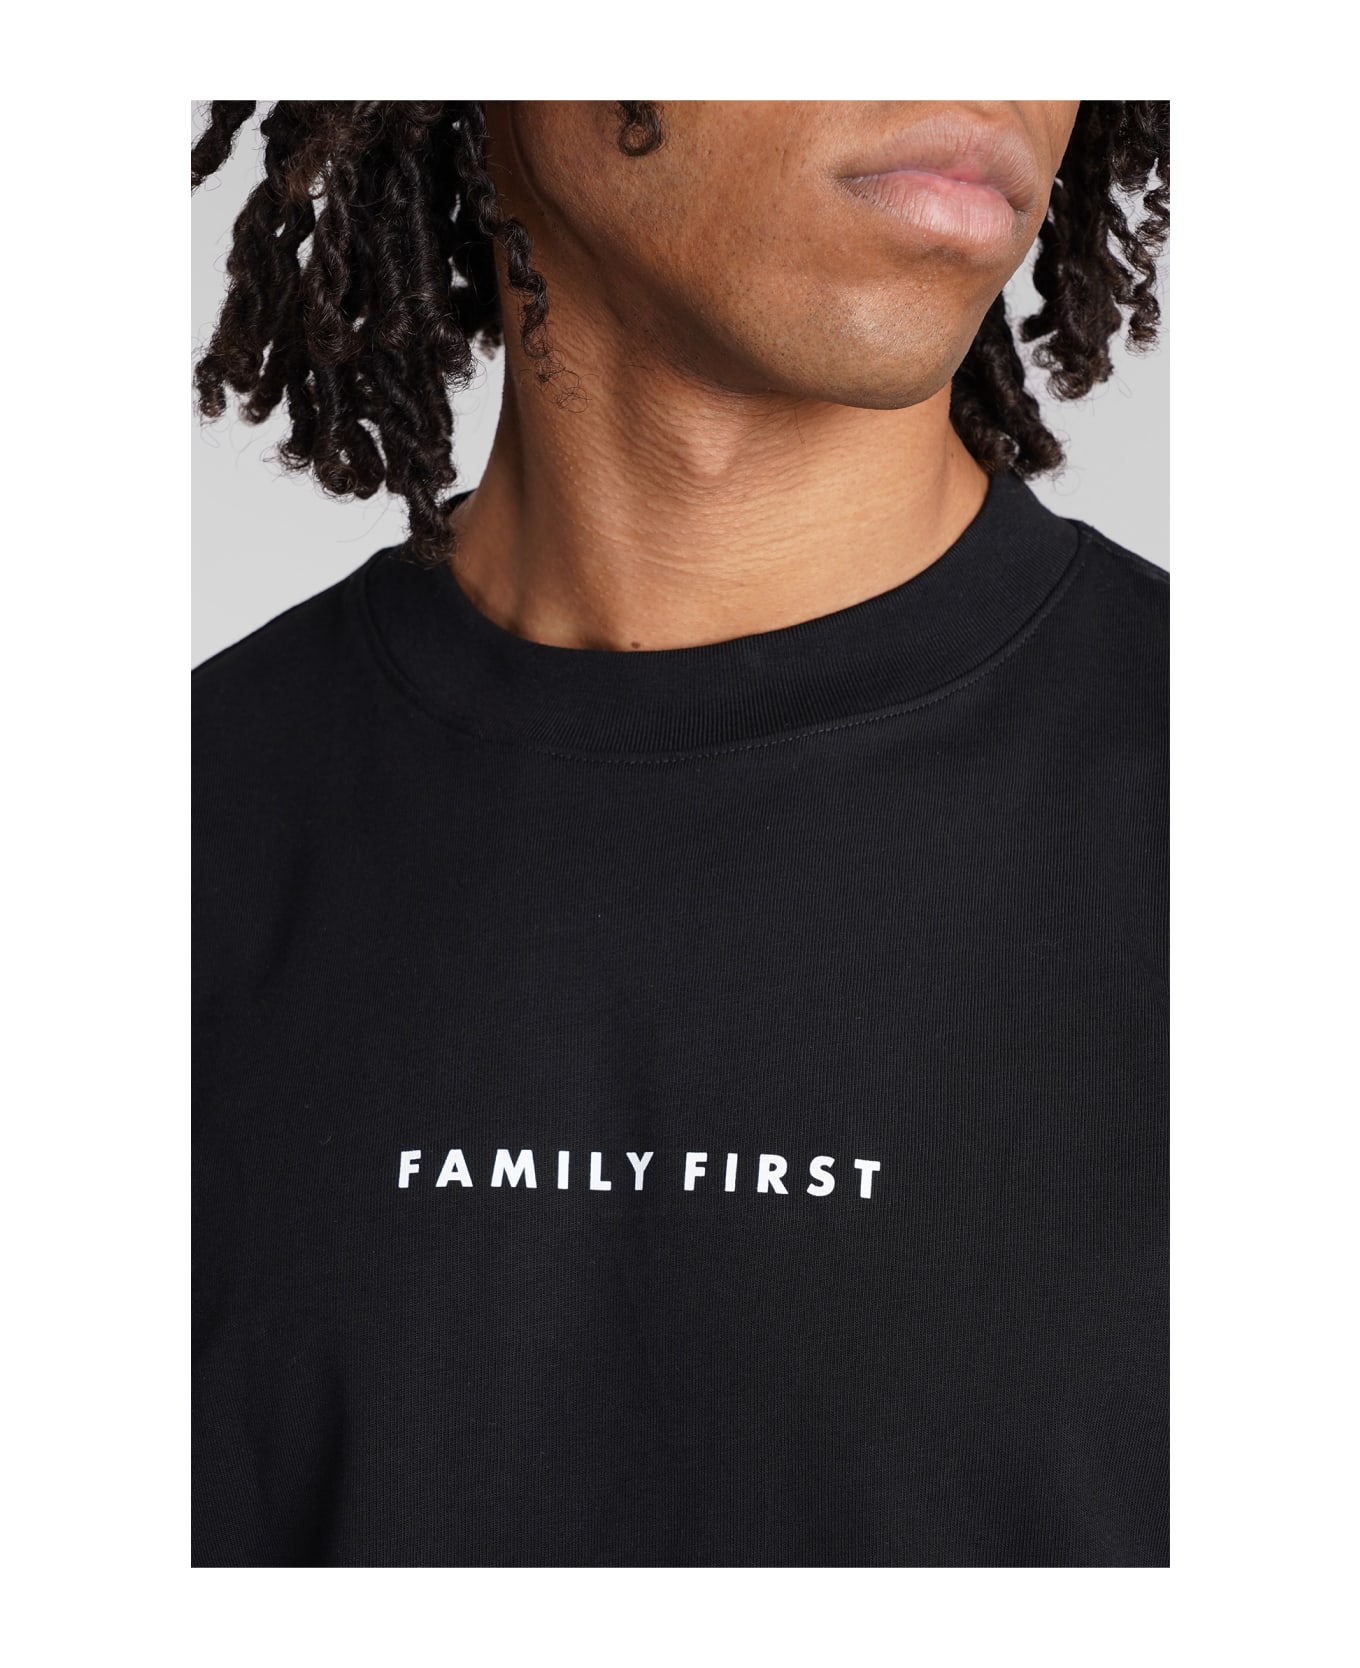 Family First Milano T-shirt In Black Cotton - BLACK シャツ